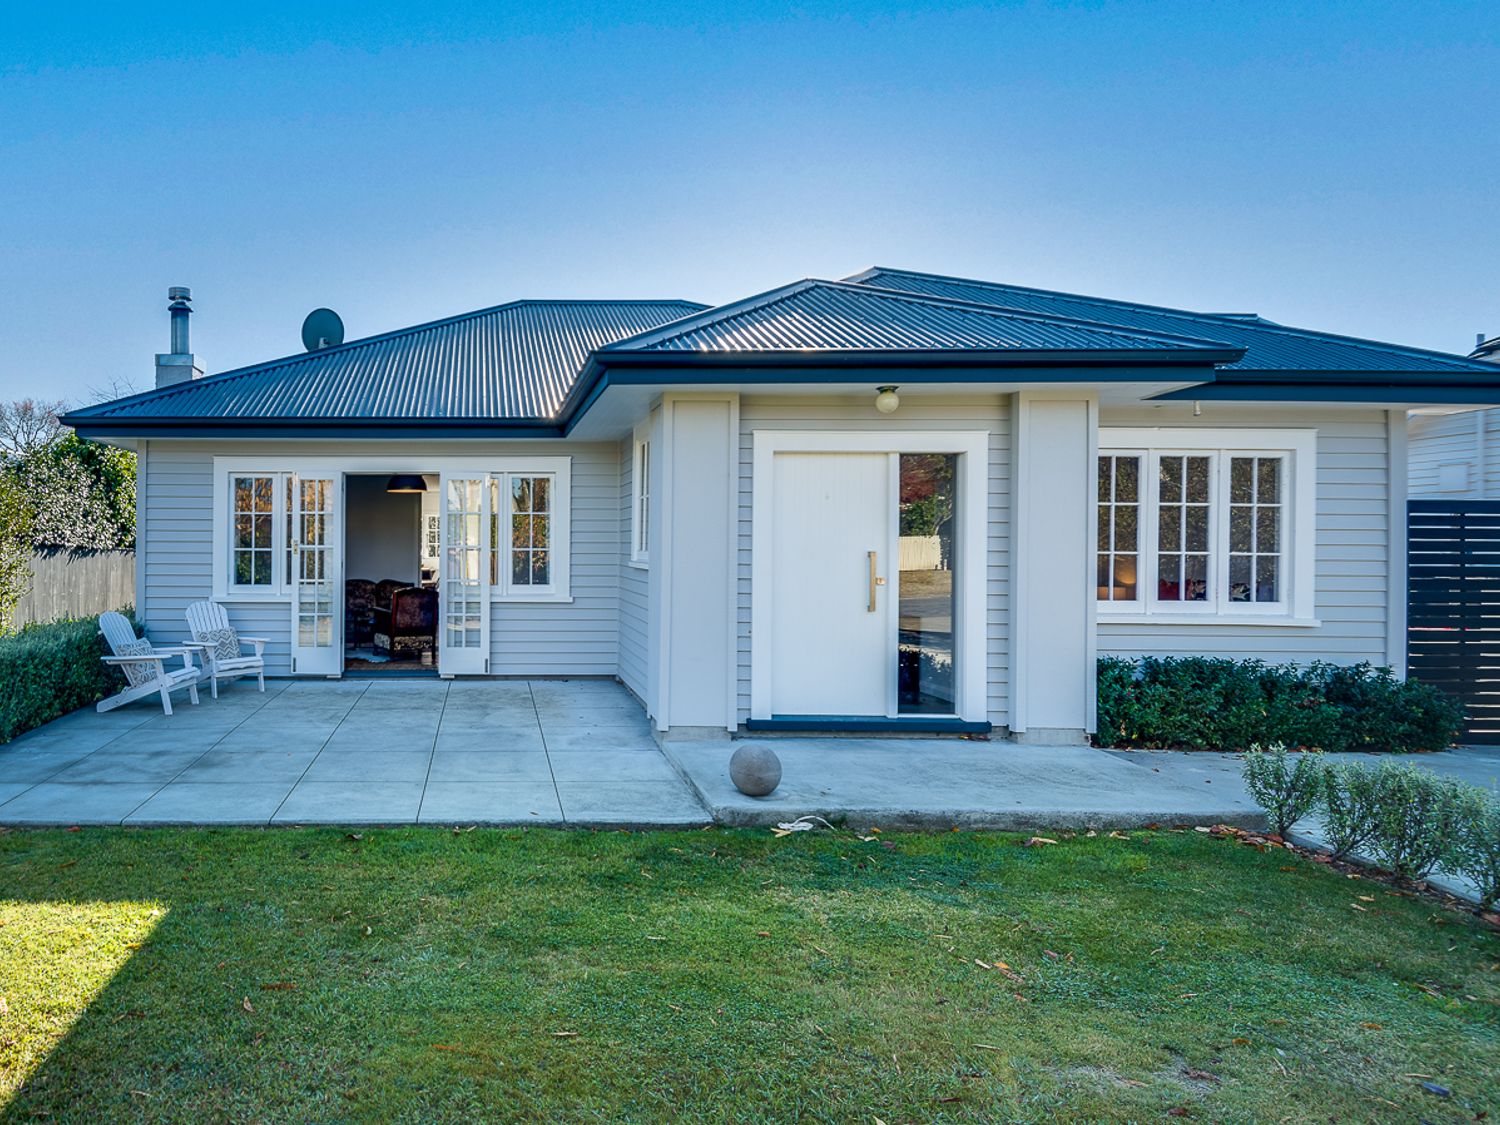 Gem on Gillean - Havelock North Holiday Home -  - 1074469 - photo 1